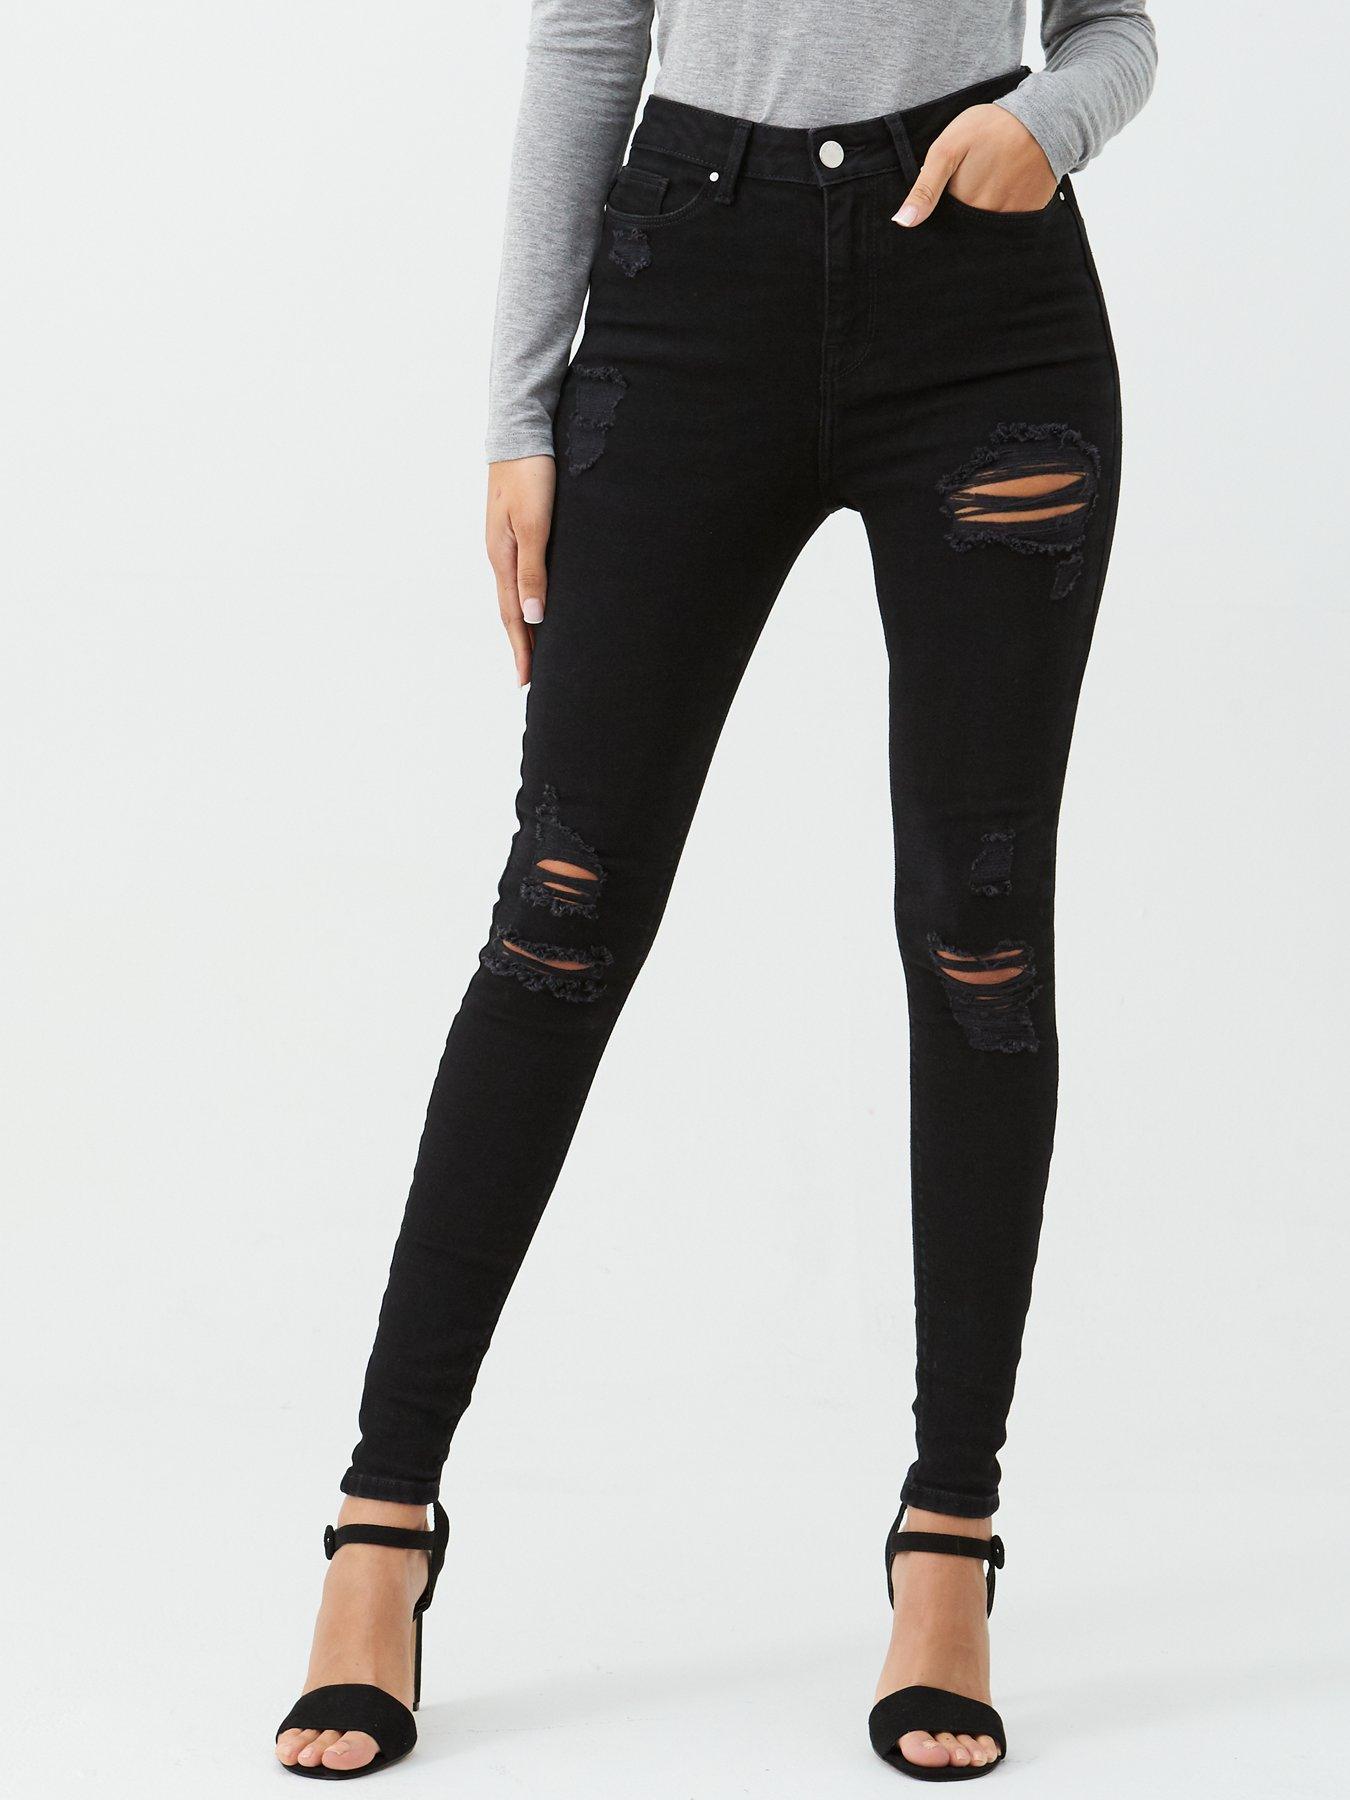 black skinny ripped jeans high waisted